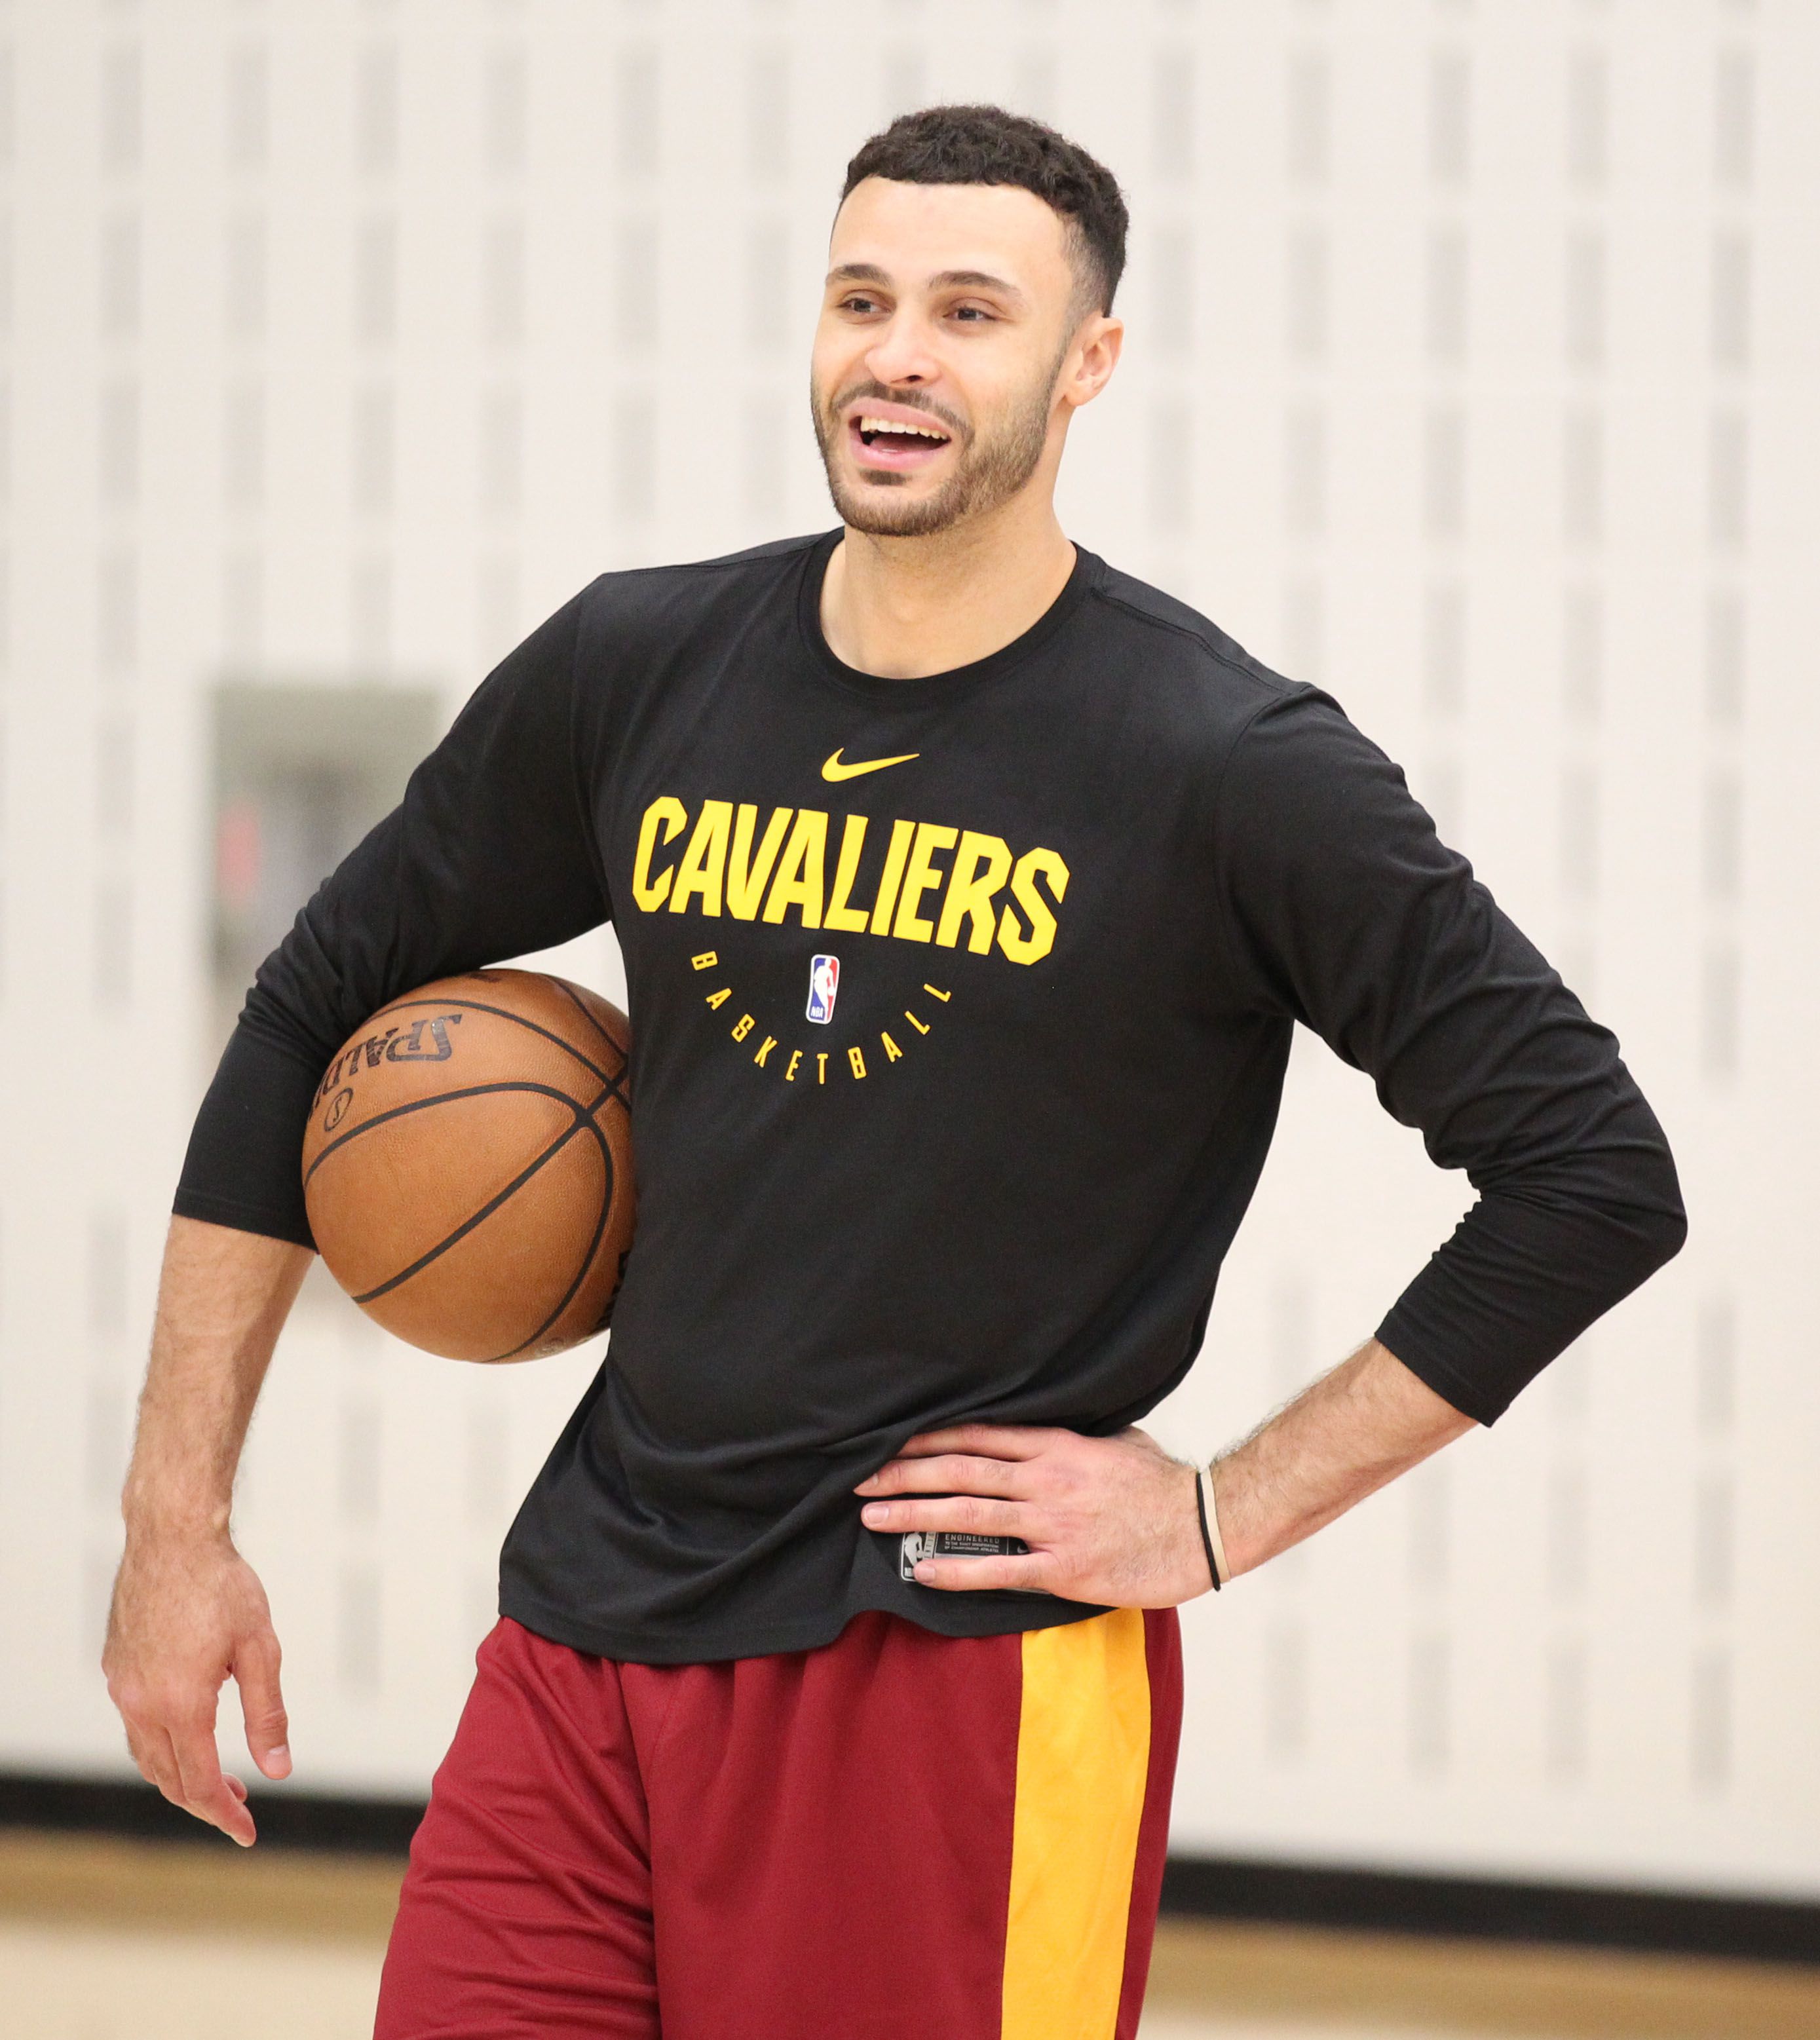 Cavs Nation - Can't tell if Larry Nance Jr. is trolling or